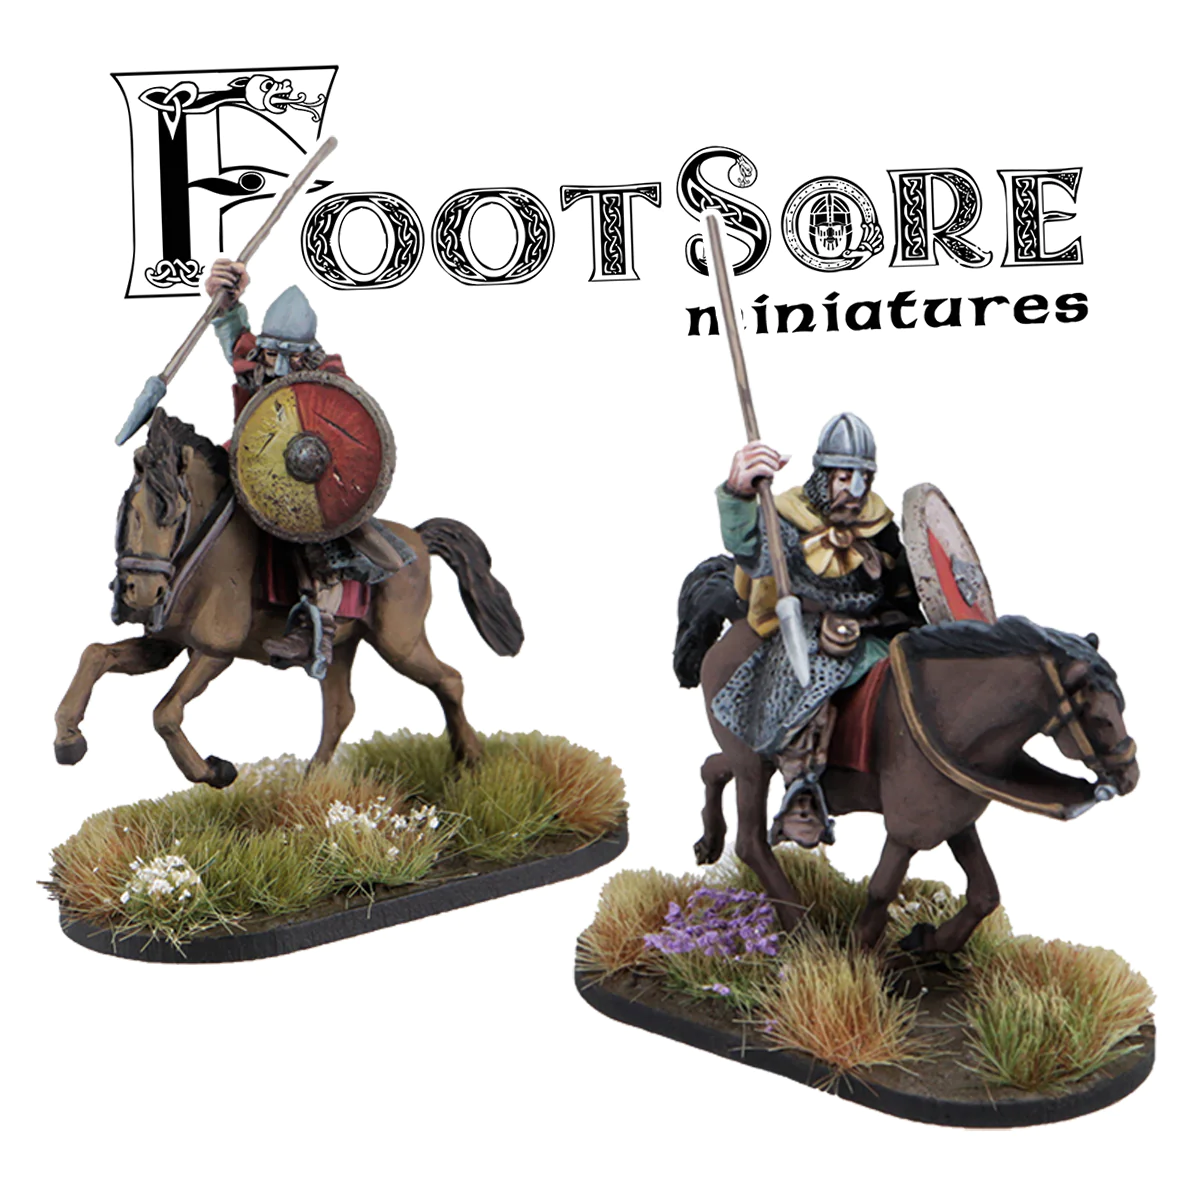 LSX100 Footsore Miniatures Anglo-Dane Cavalry with Spears